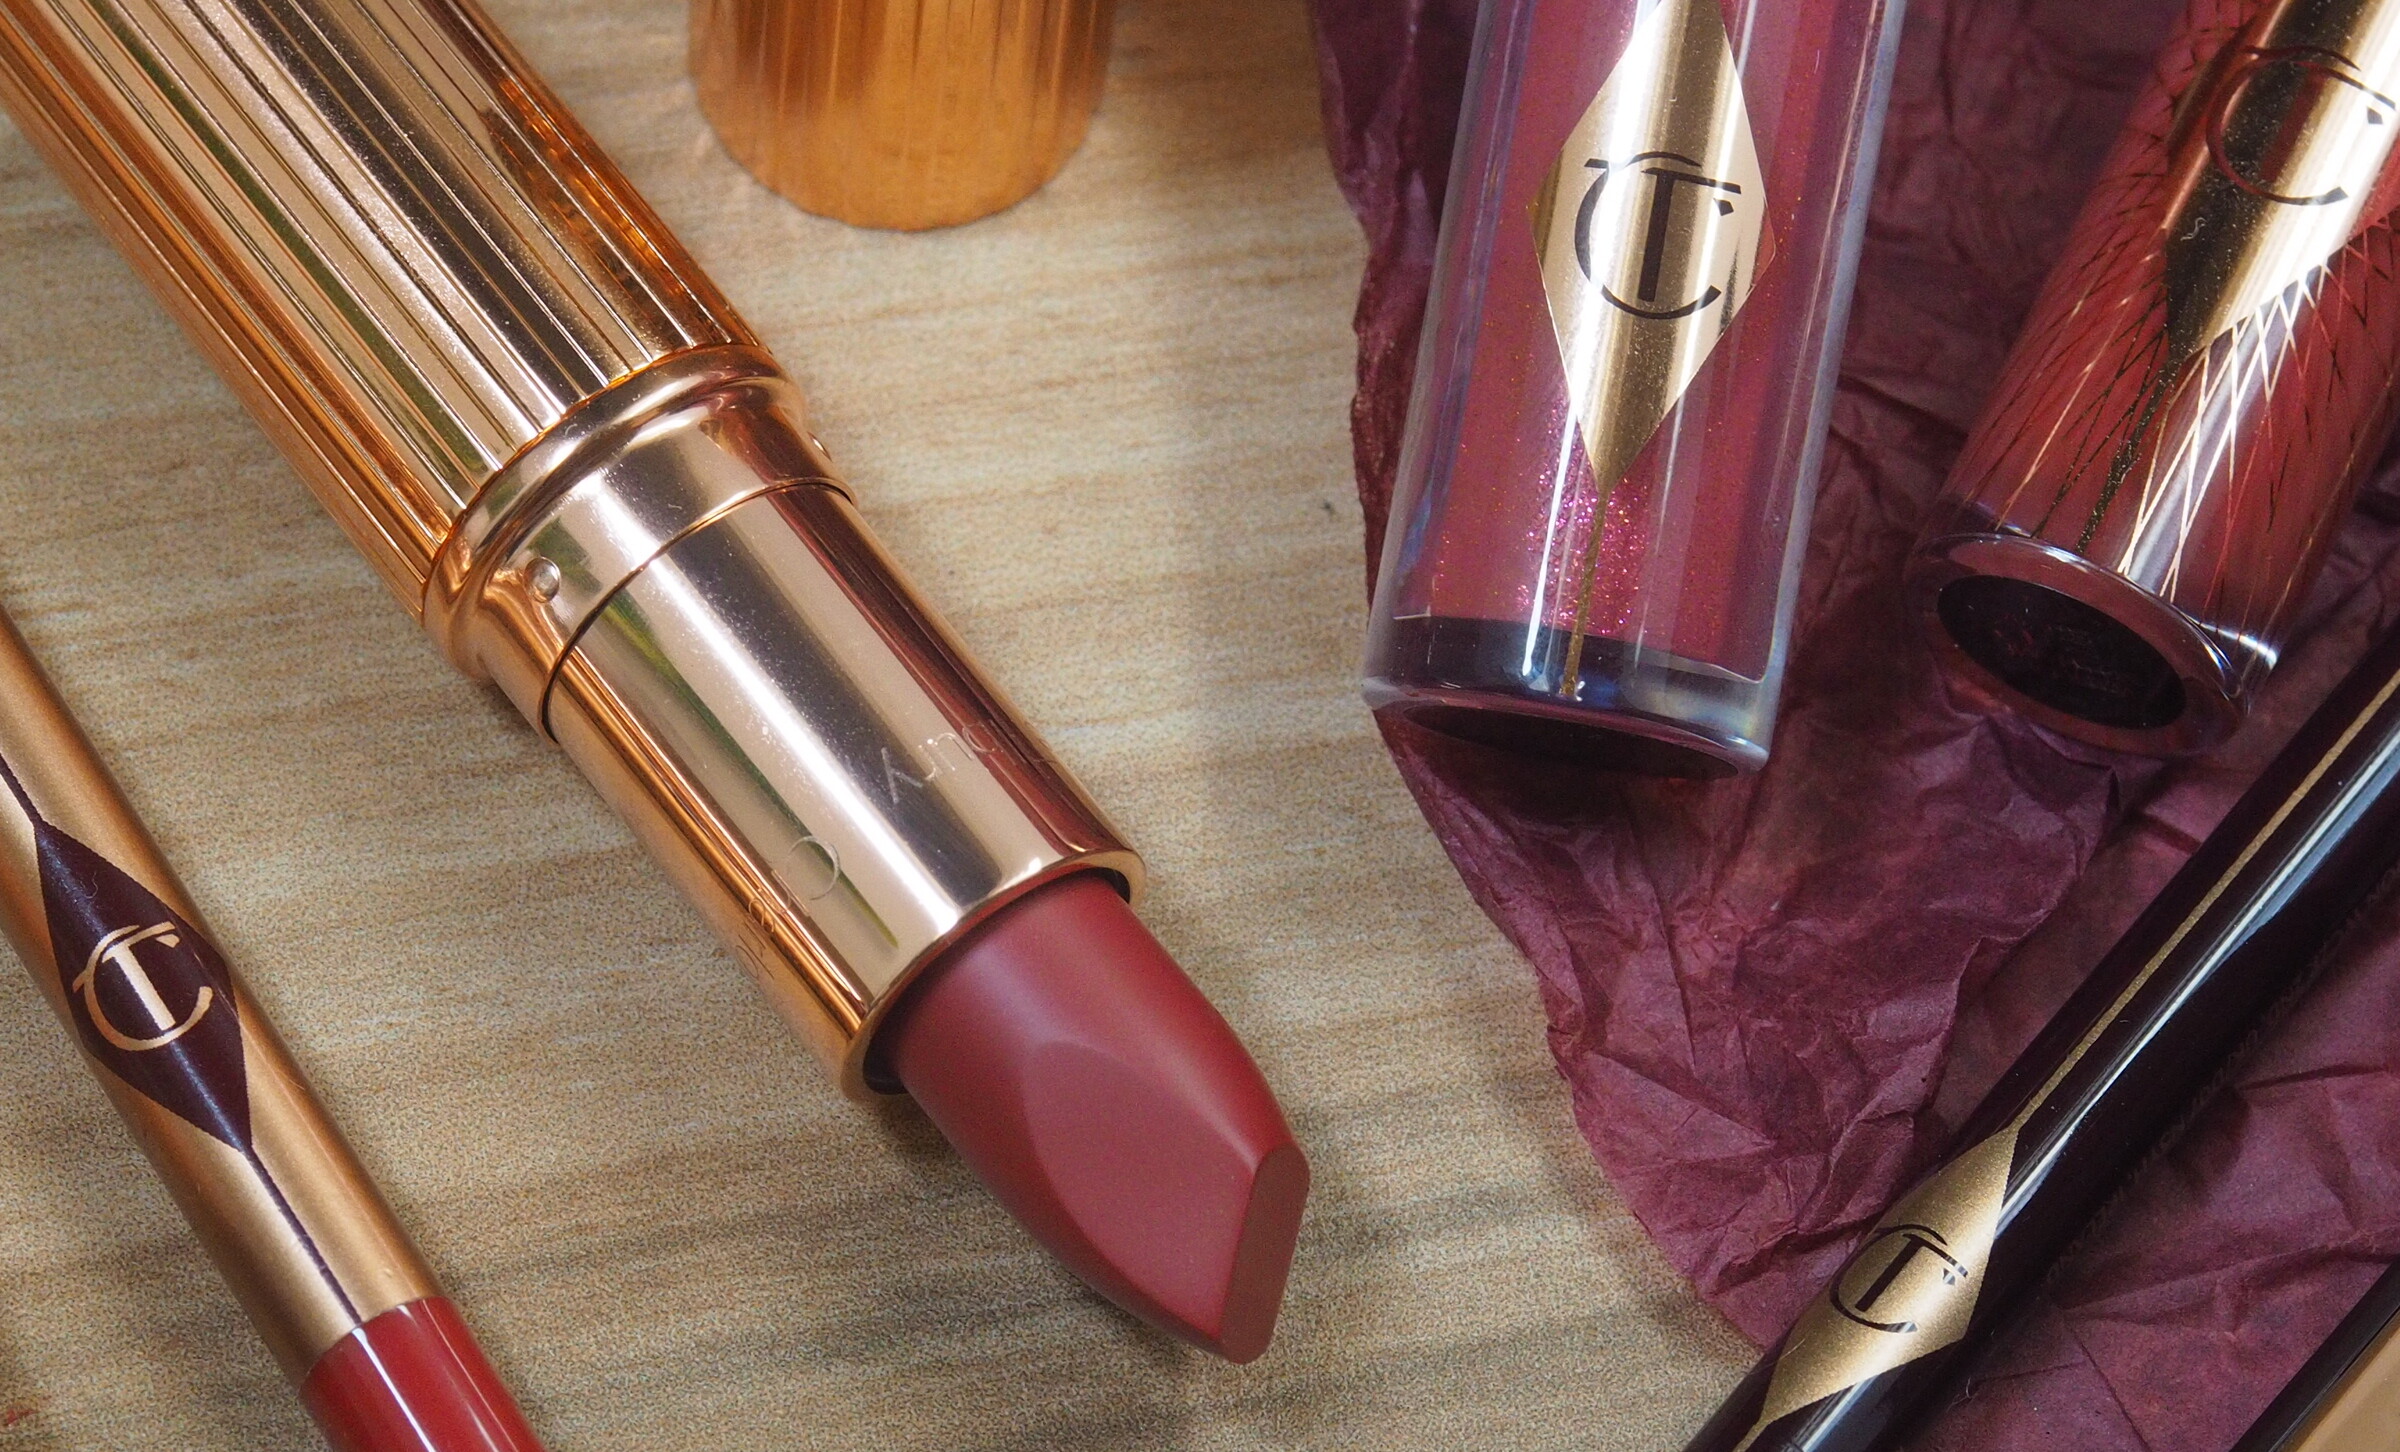 [REVIEW] Charlotte Tilbury ‘Walk of No Shame’ Collection